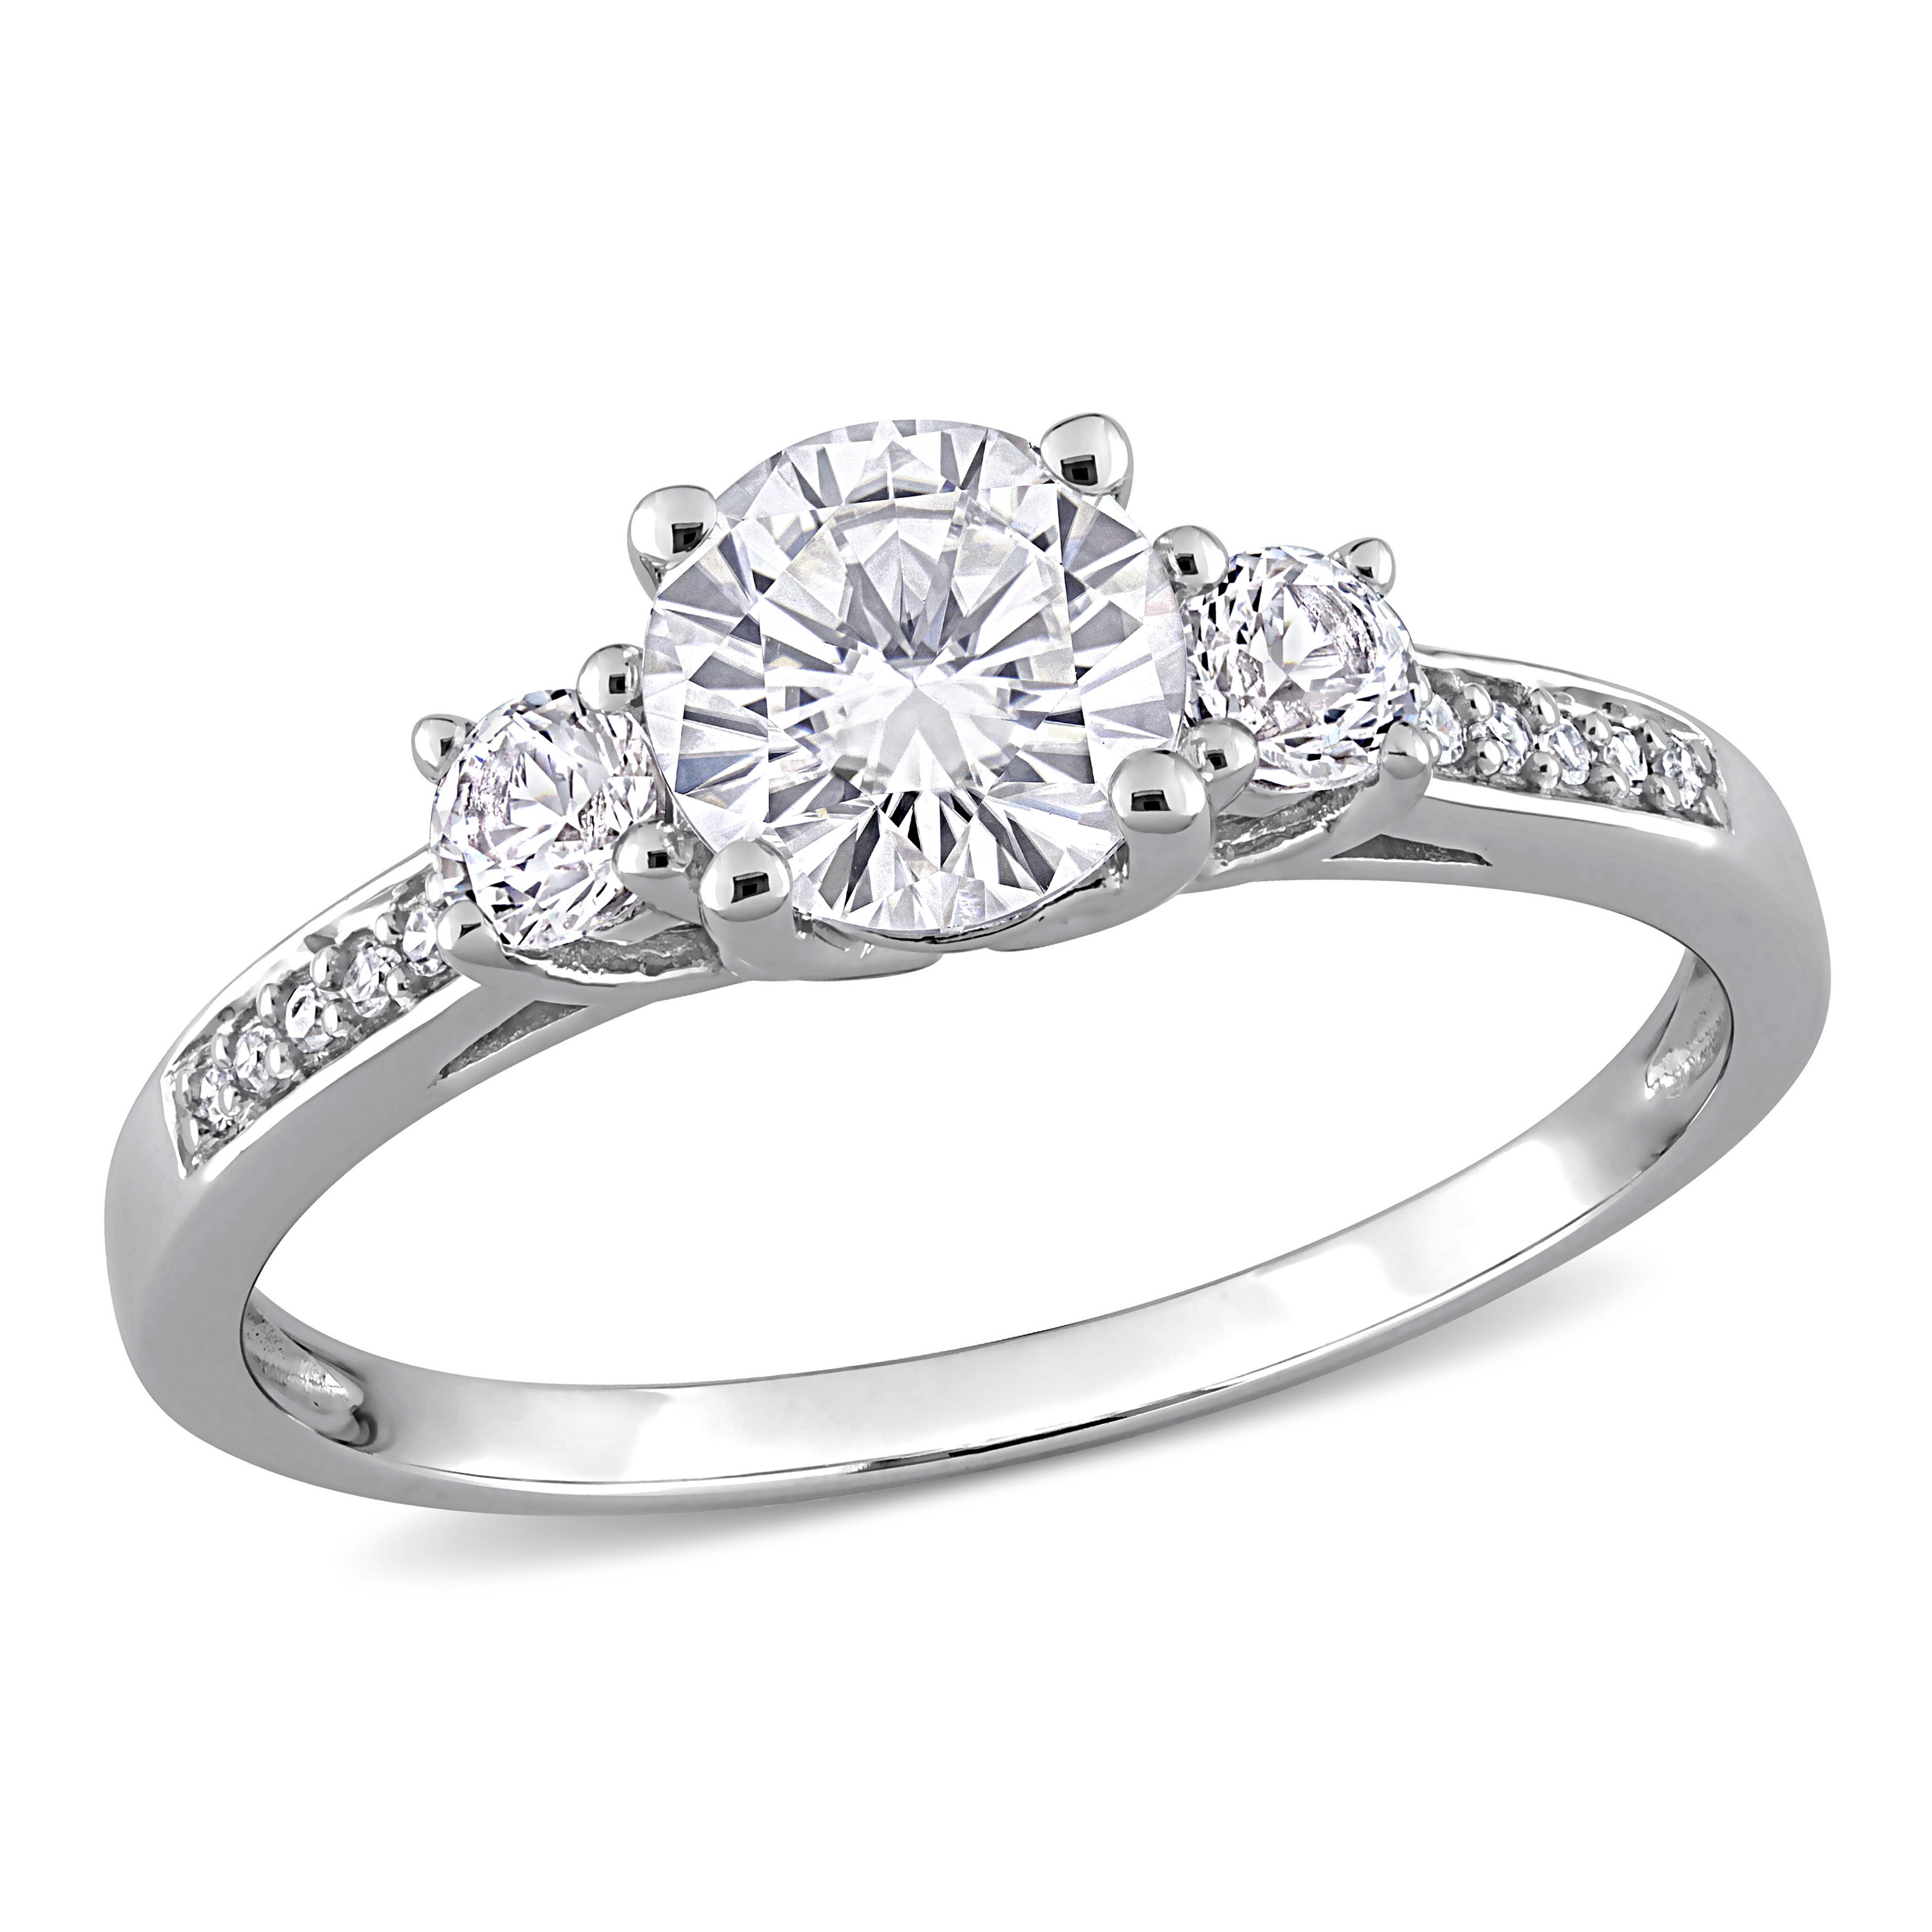 Everly Women's Engagement Anniversary Bridal 1 1/3 CT. Round Created White Sapphire Round-Cut Diamond Accent (G-H, I2-I3) 10kt White Gold 3-Stone Ring with 4 Prong/Pave Setting & Shoulder Diamonds - image 3 of 10